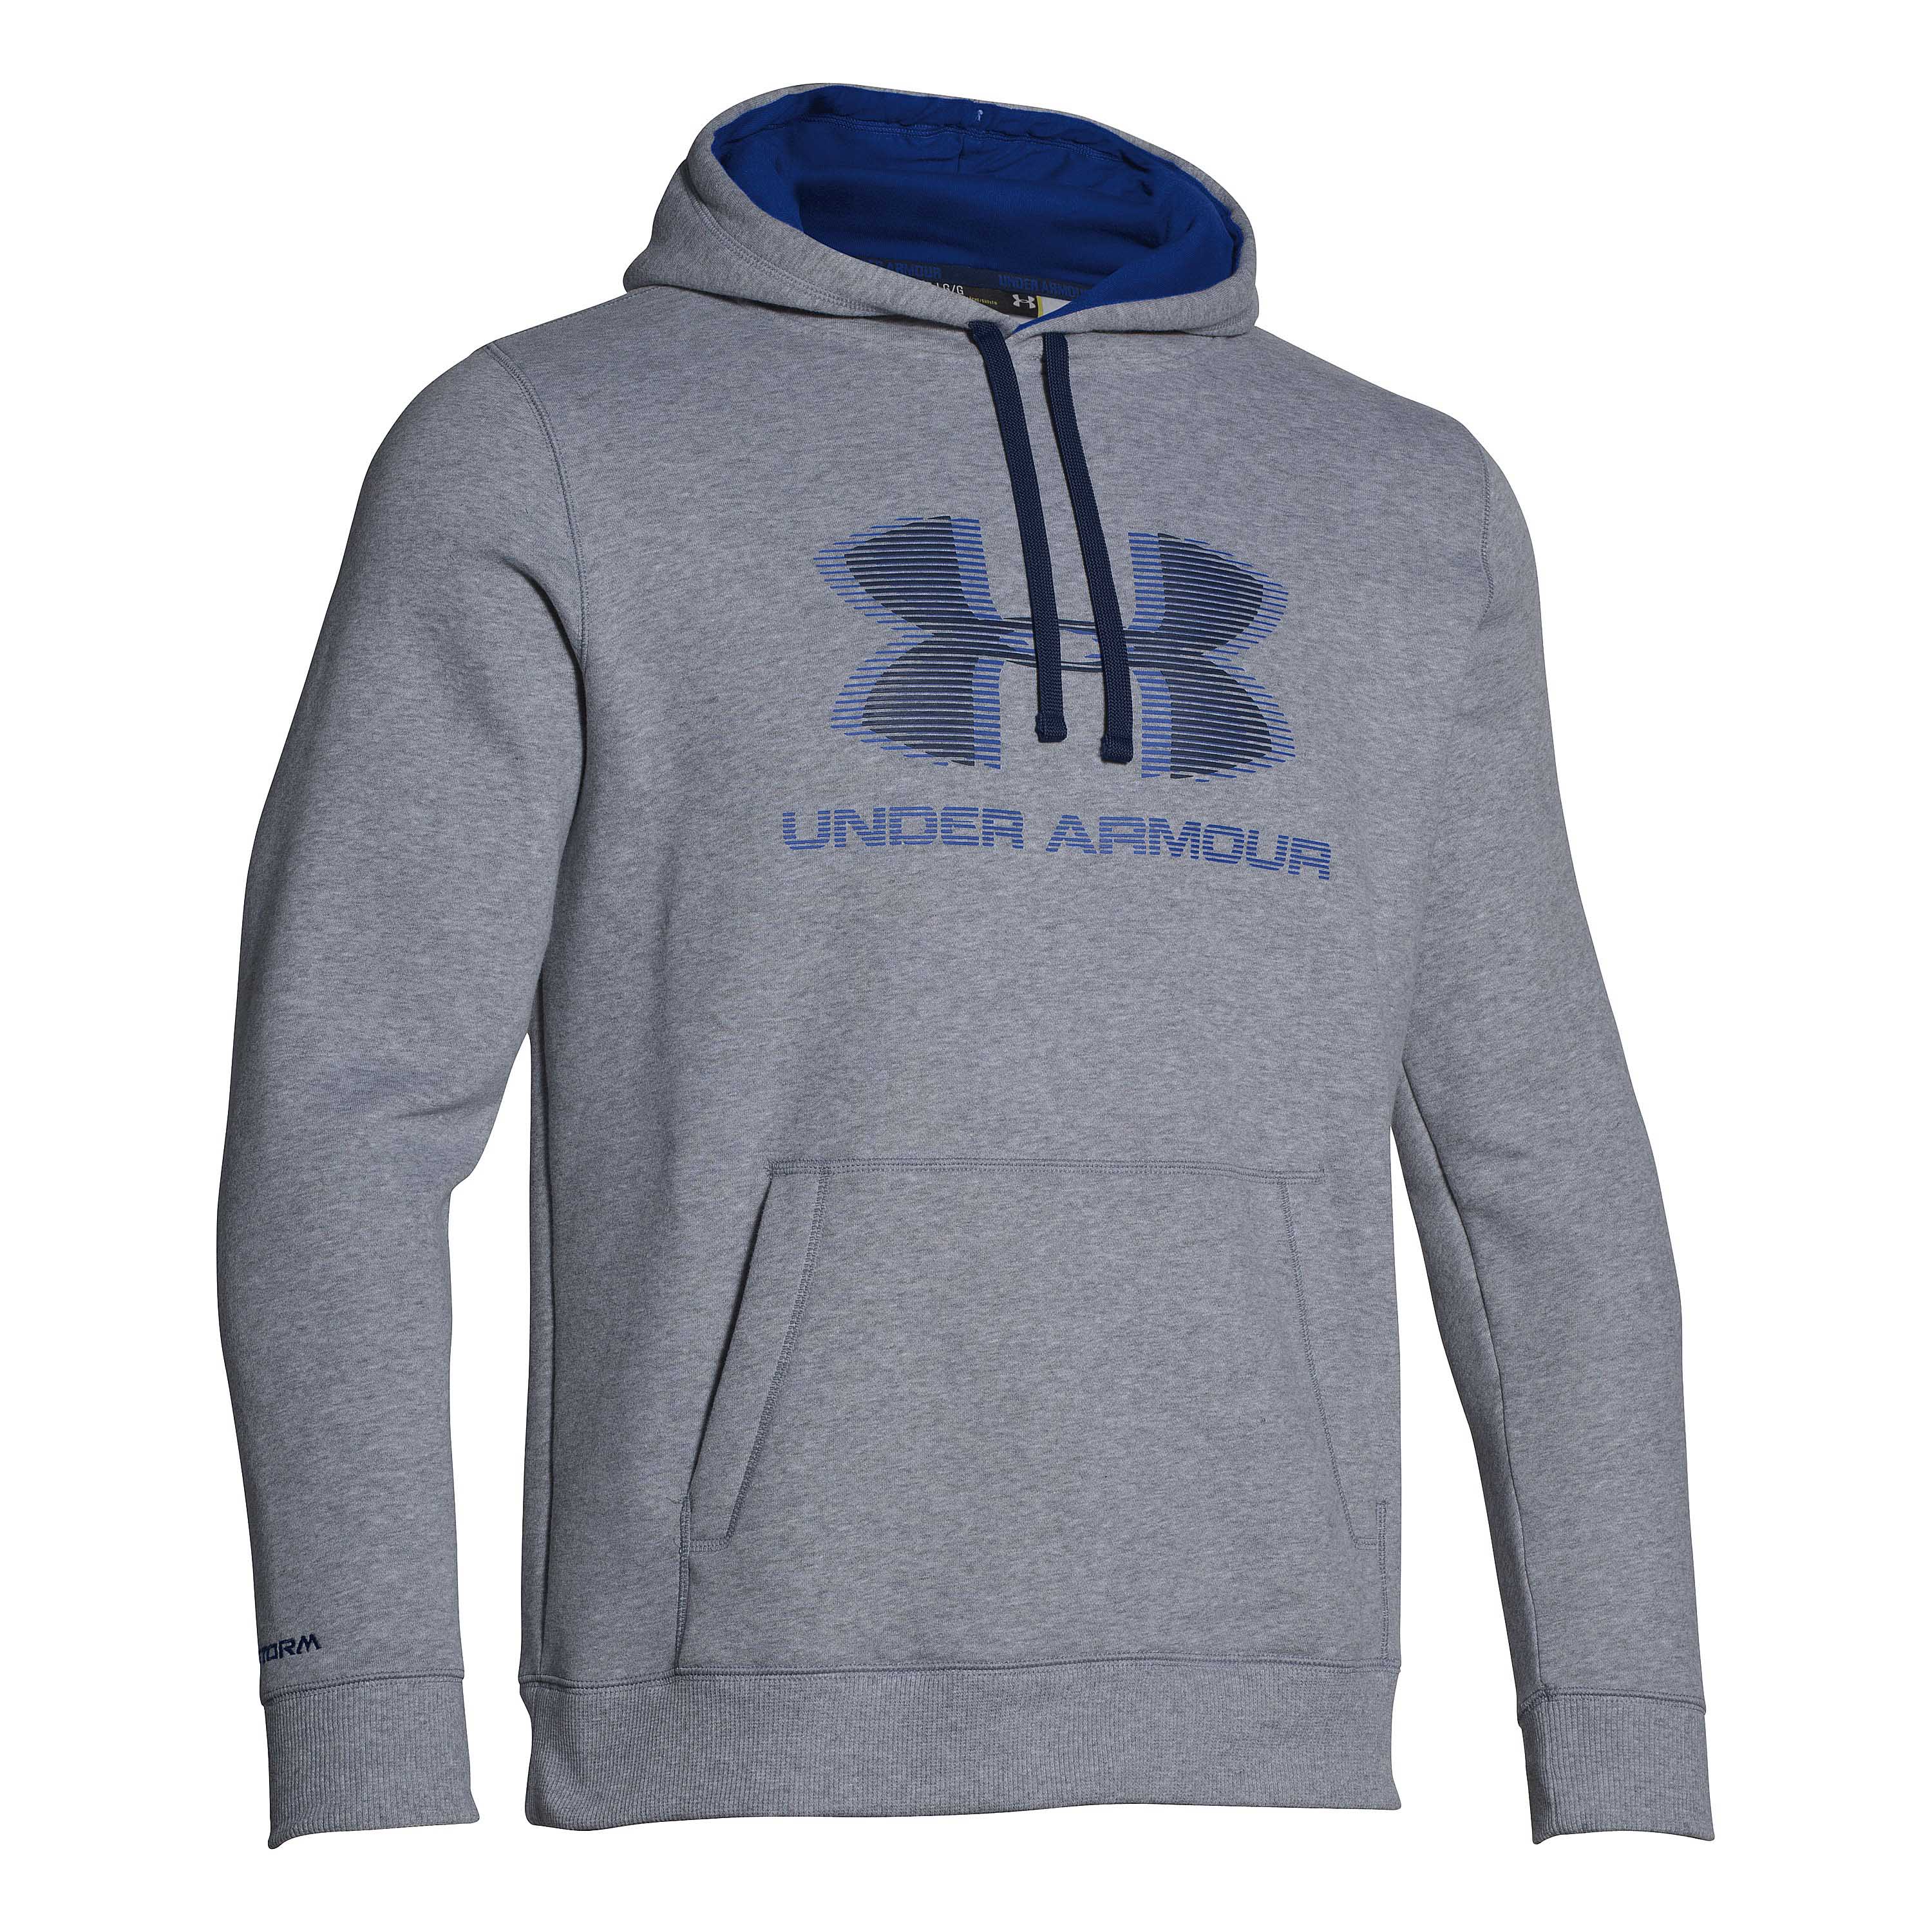 Under Armour Storm Rival Graphic Pullover gray/blue | Under Armour ...